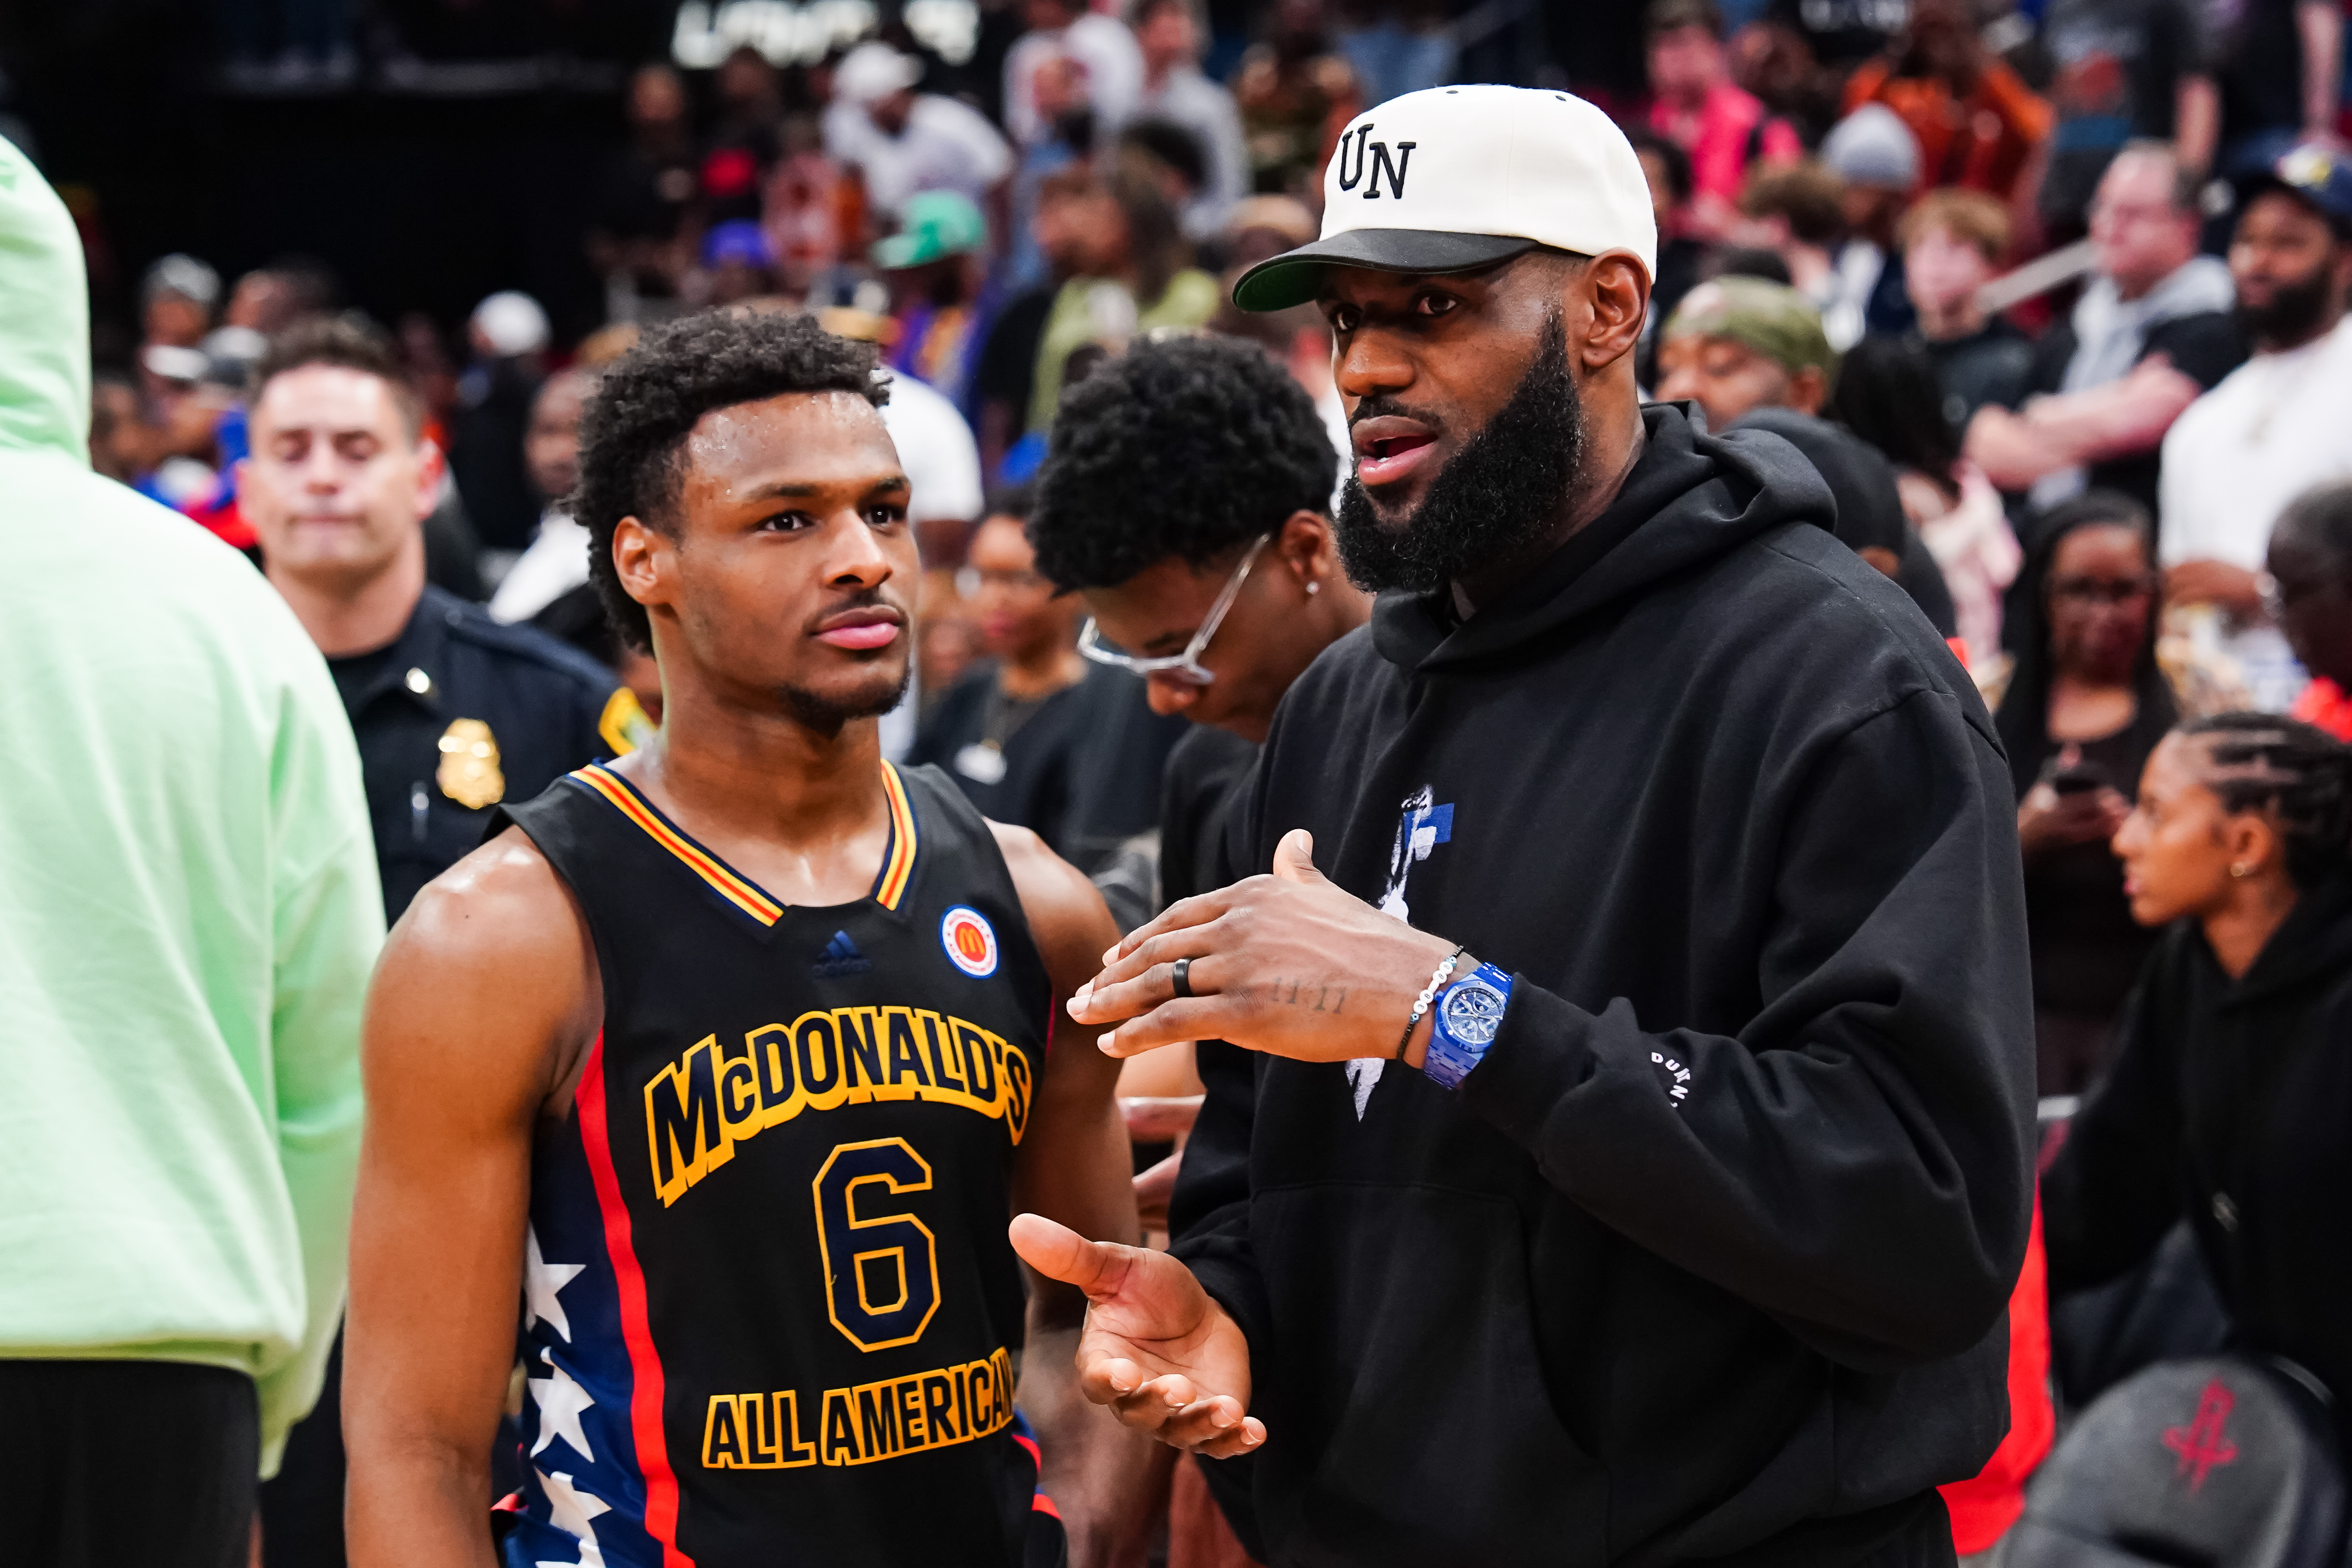 Bronny und LeBron James beim McDonald's All American Game 2023 in Houston, 2023 | Quelle: Getty Images